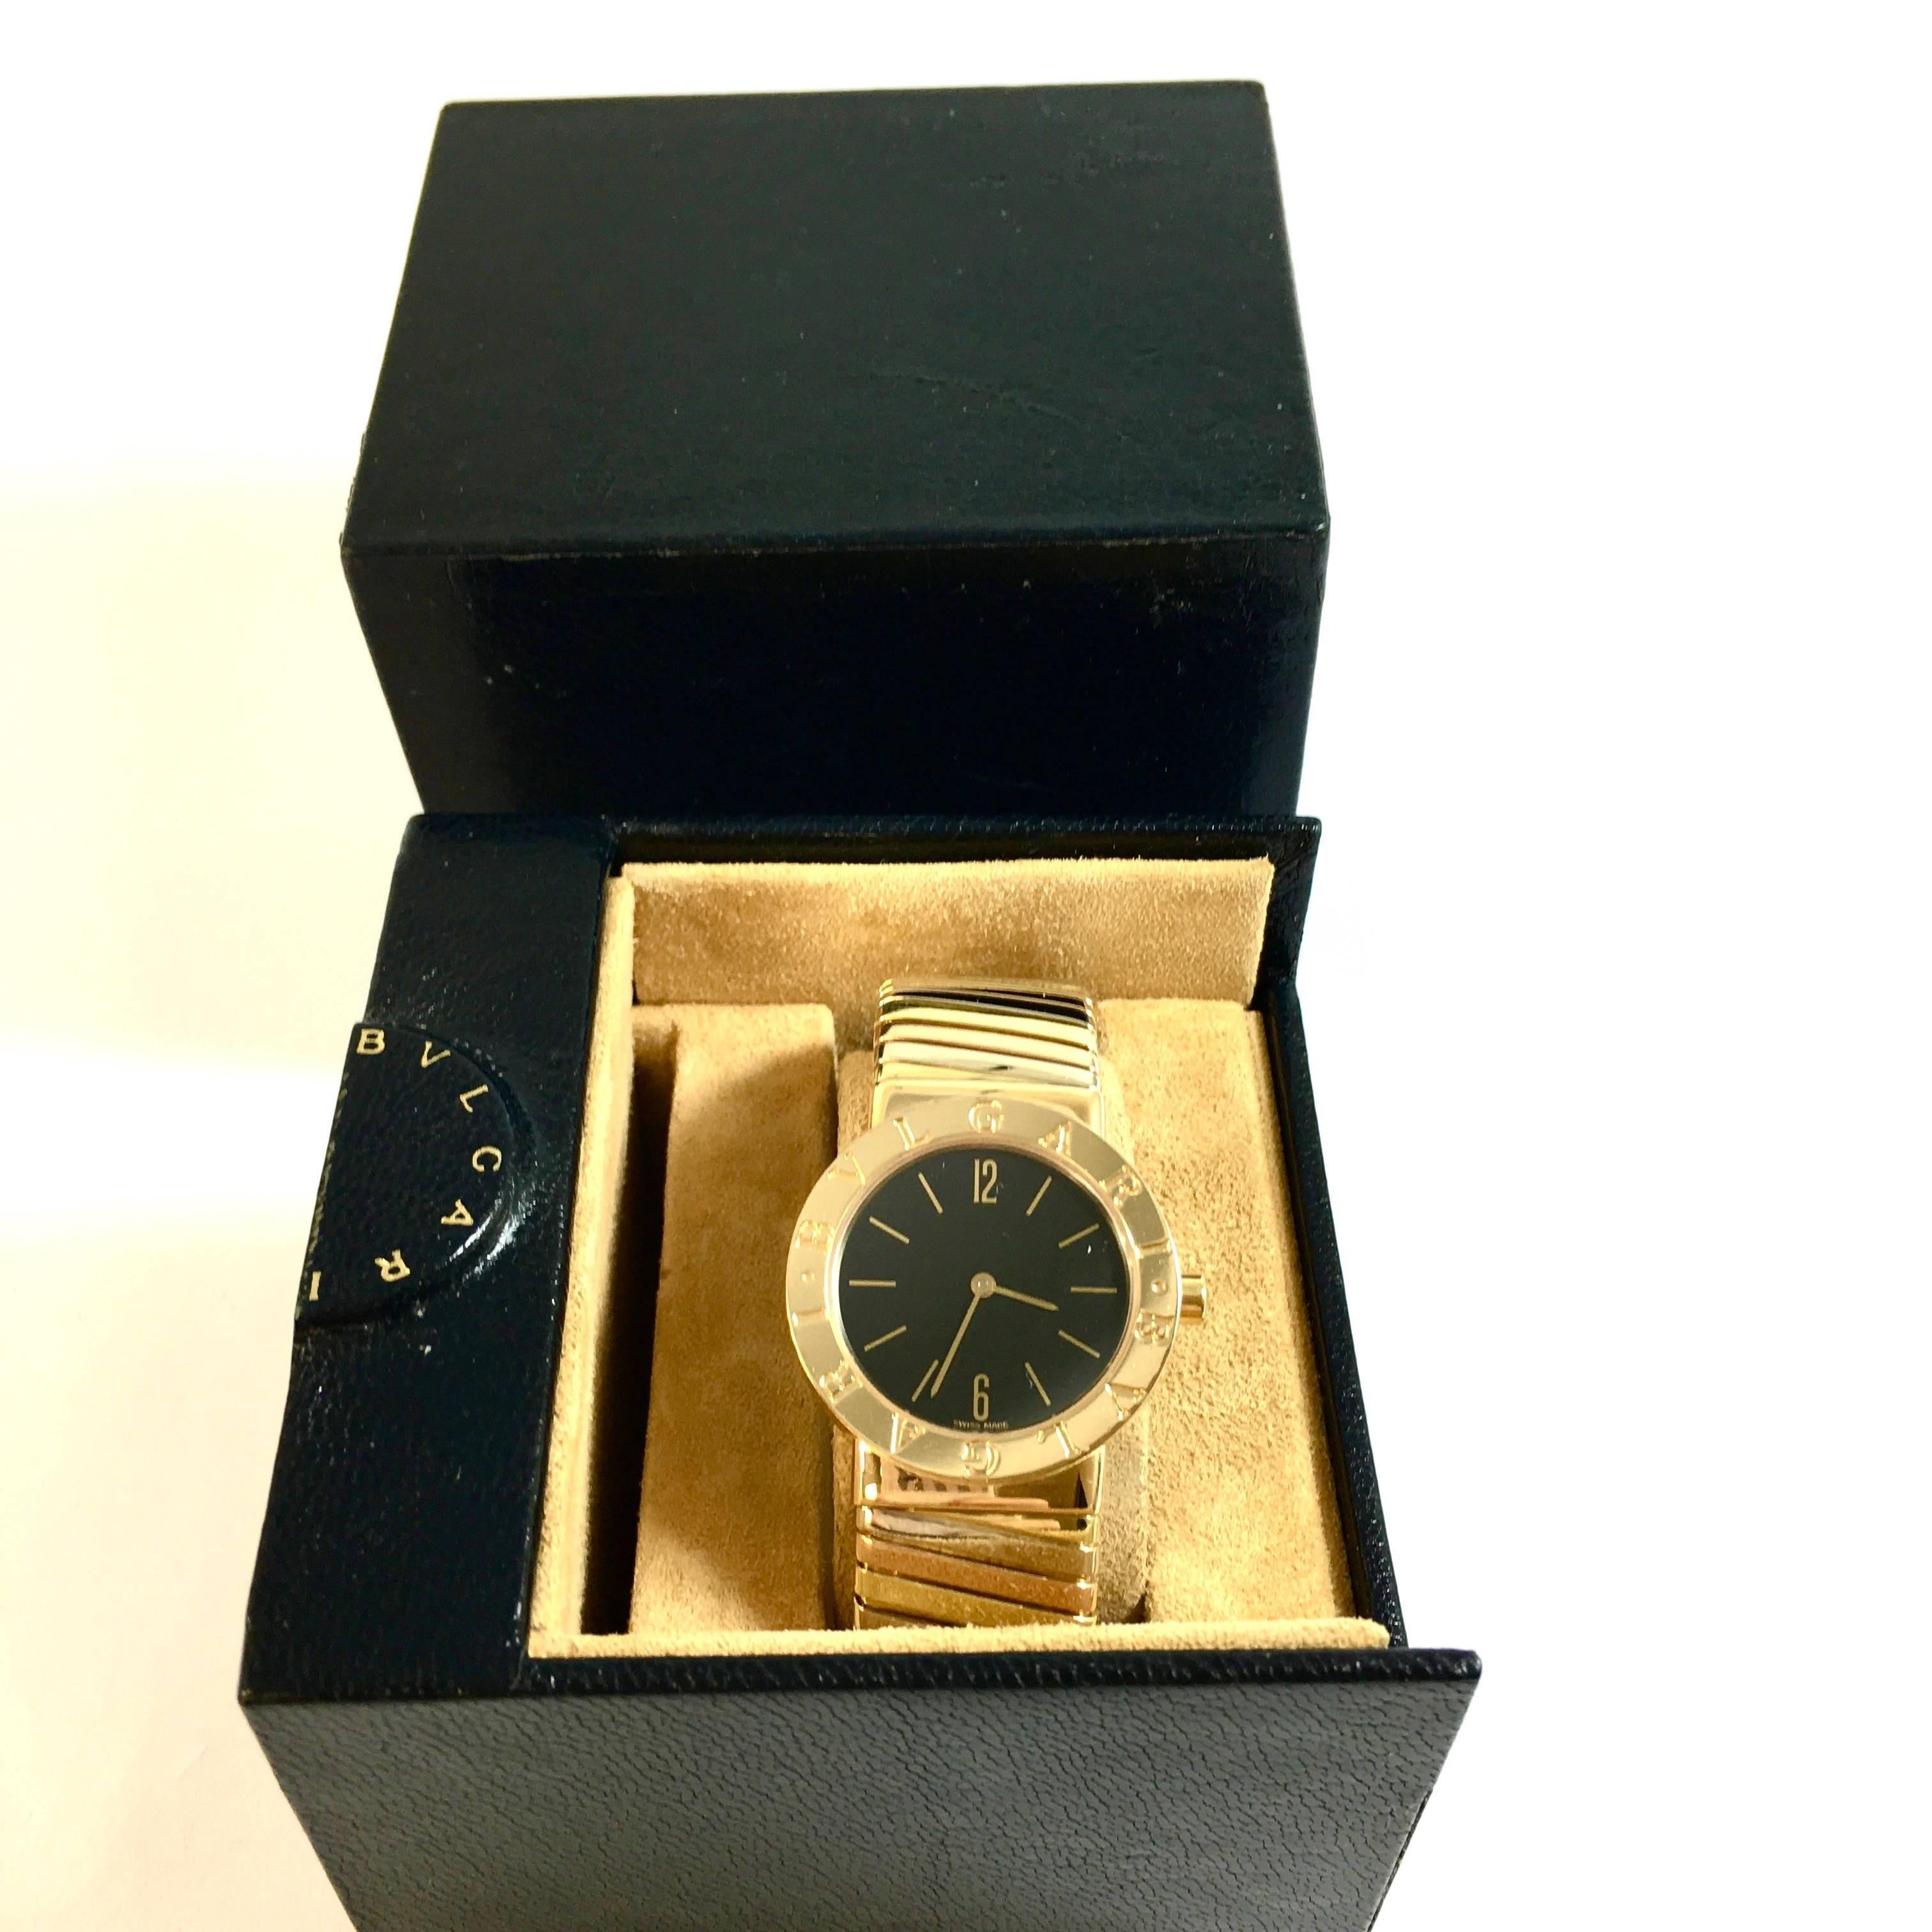 Bvlgari Large 30 mm Tubogas watch Ref# BB 30 2T in 18K yellow, pink & white gold. Condition: Excellent pre-owned. In original box. 
Quartz movement, Sapphire crystal, matt black dial with applied gold Arabic numbers and batons, gold hands. Polished